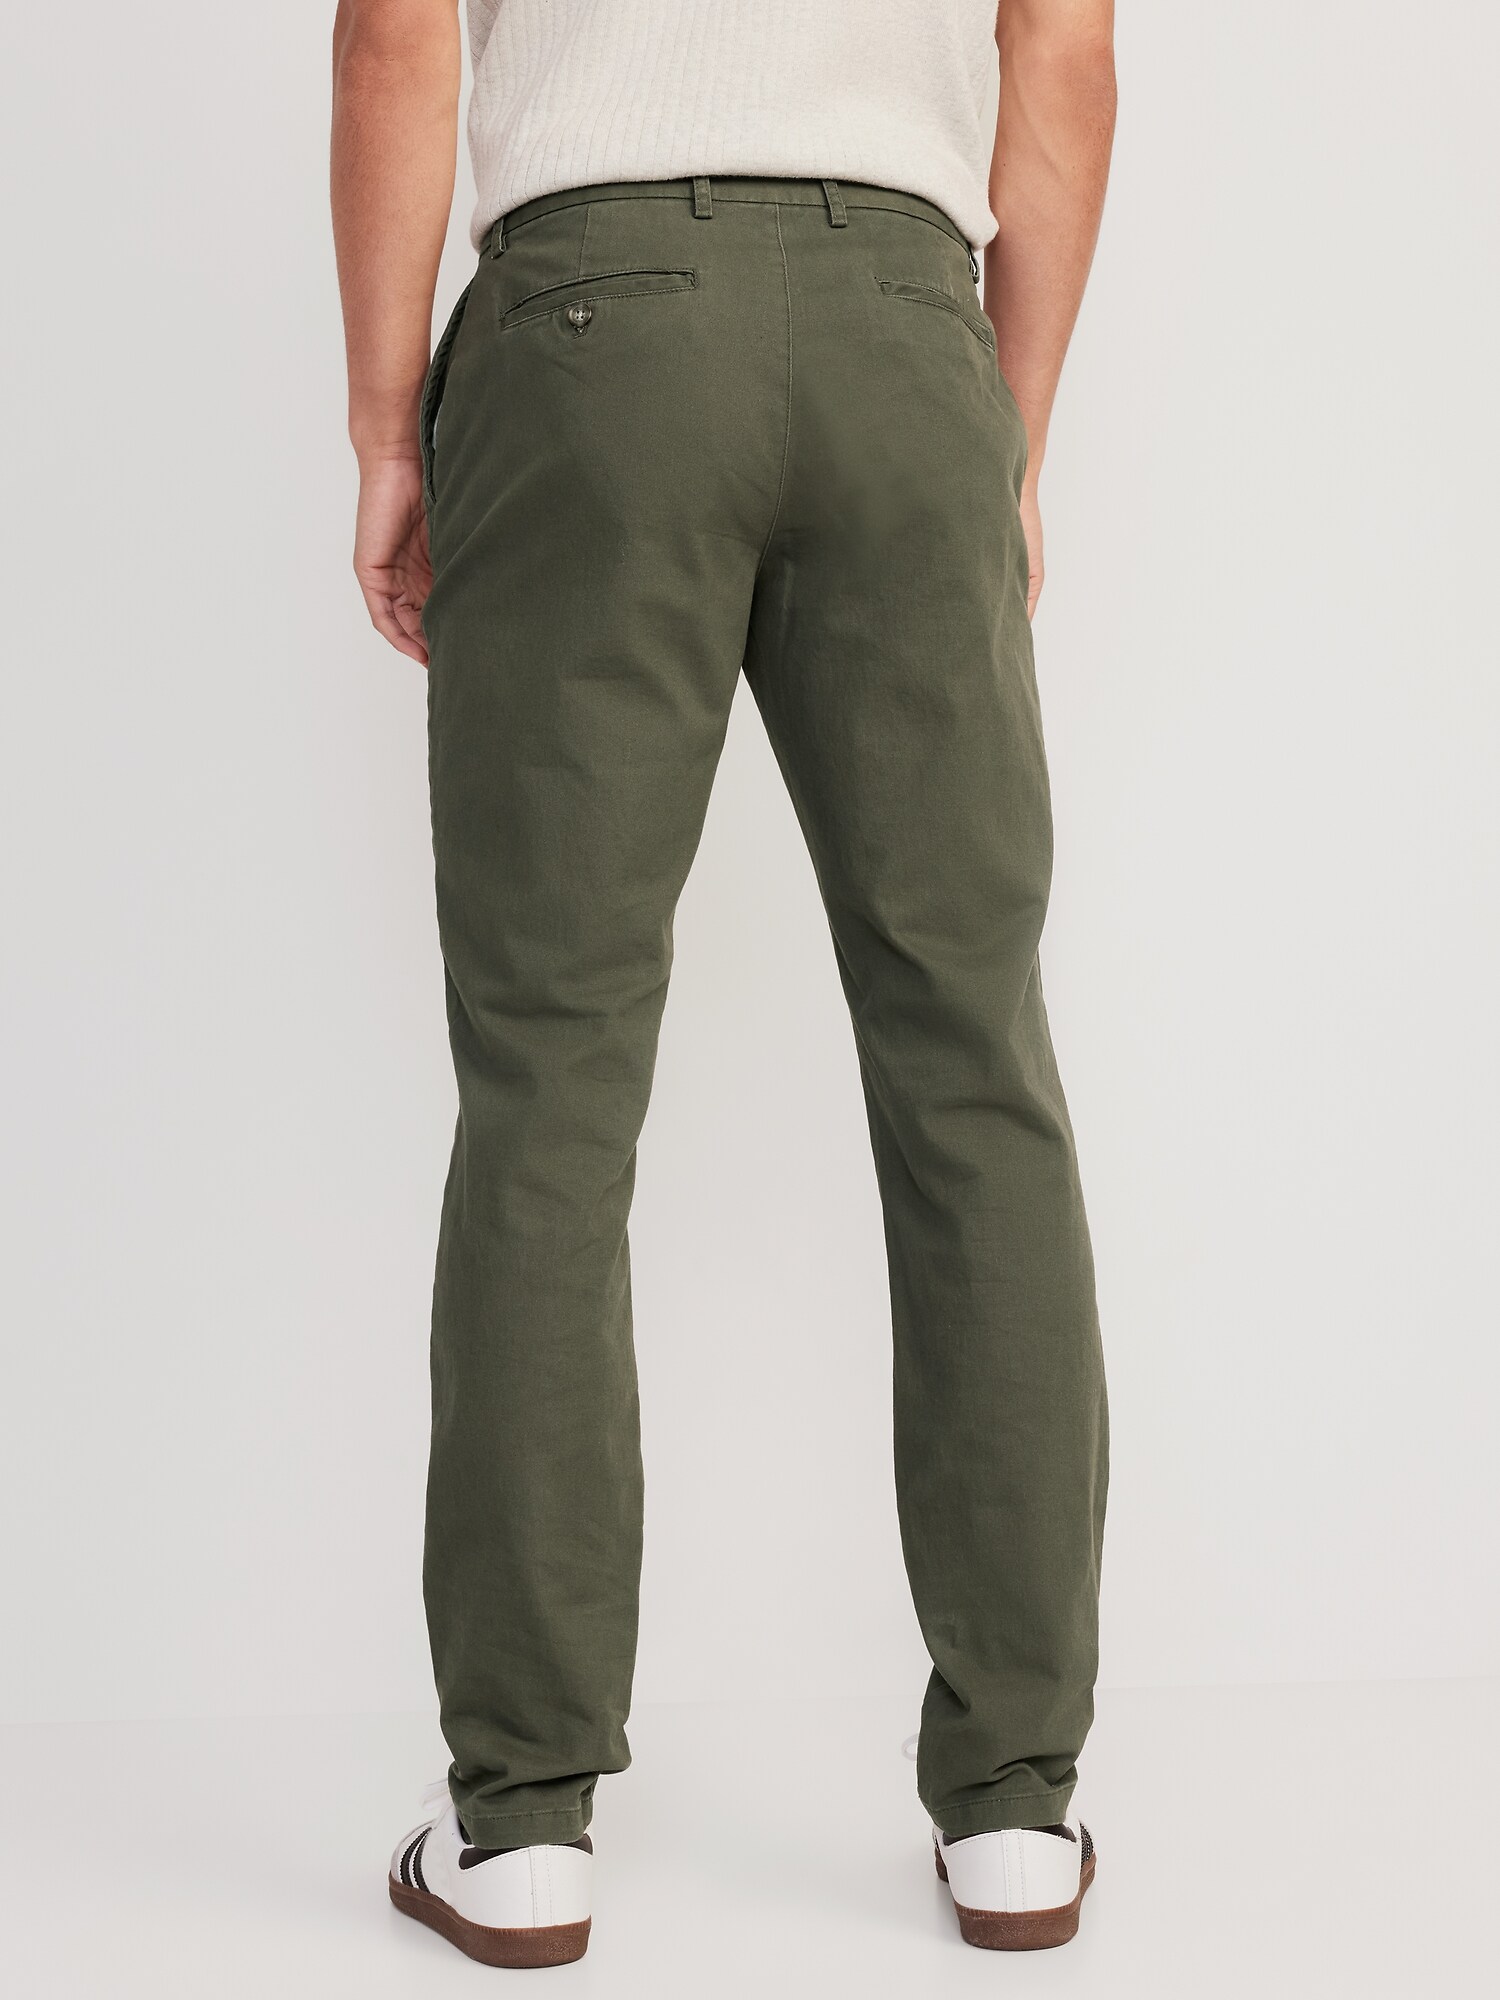 Athletic Built-In Flex Rotation Chino Pants for Men | Old Navy